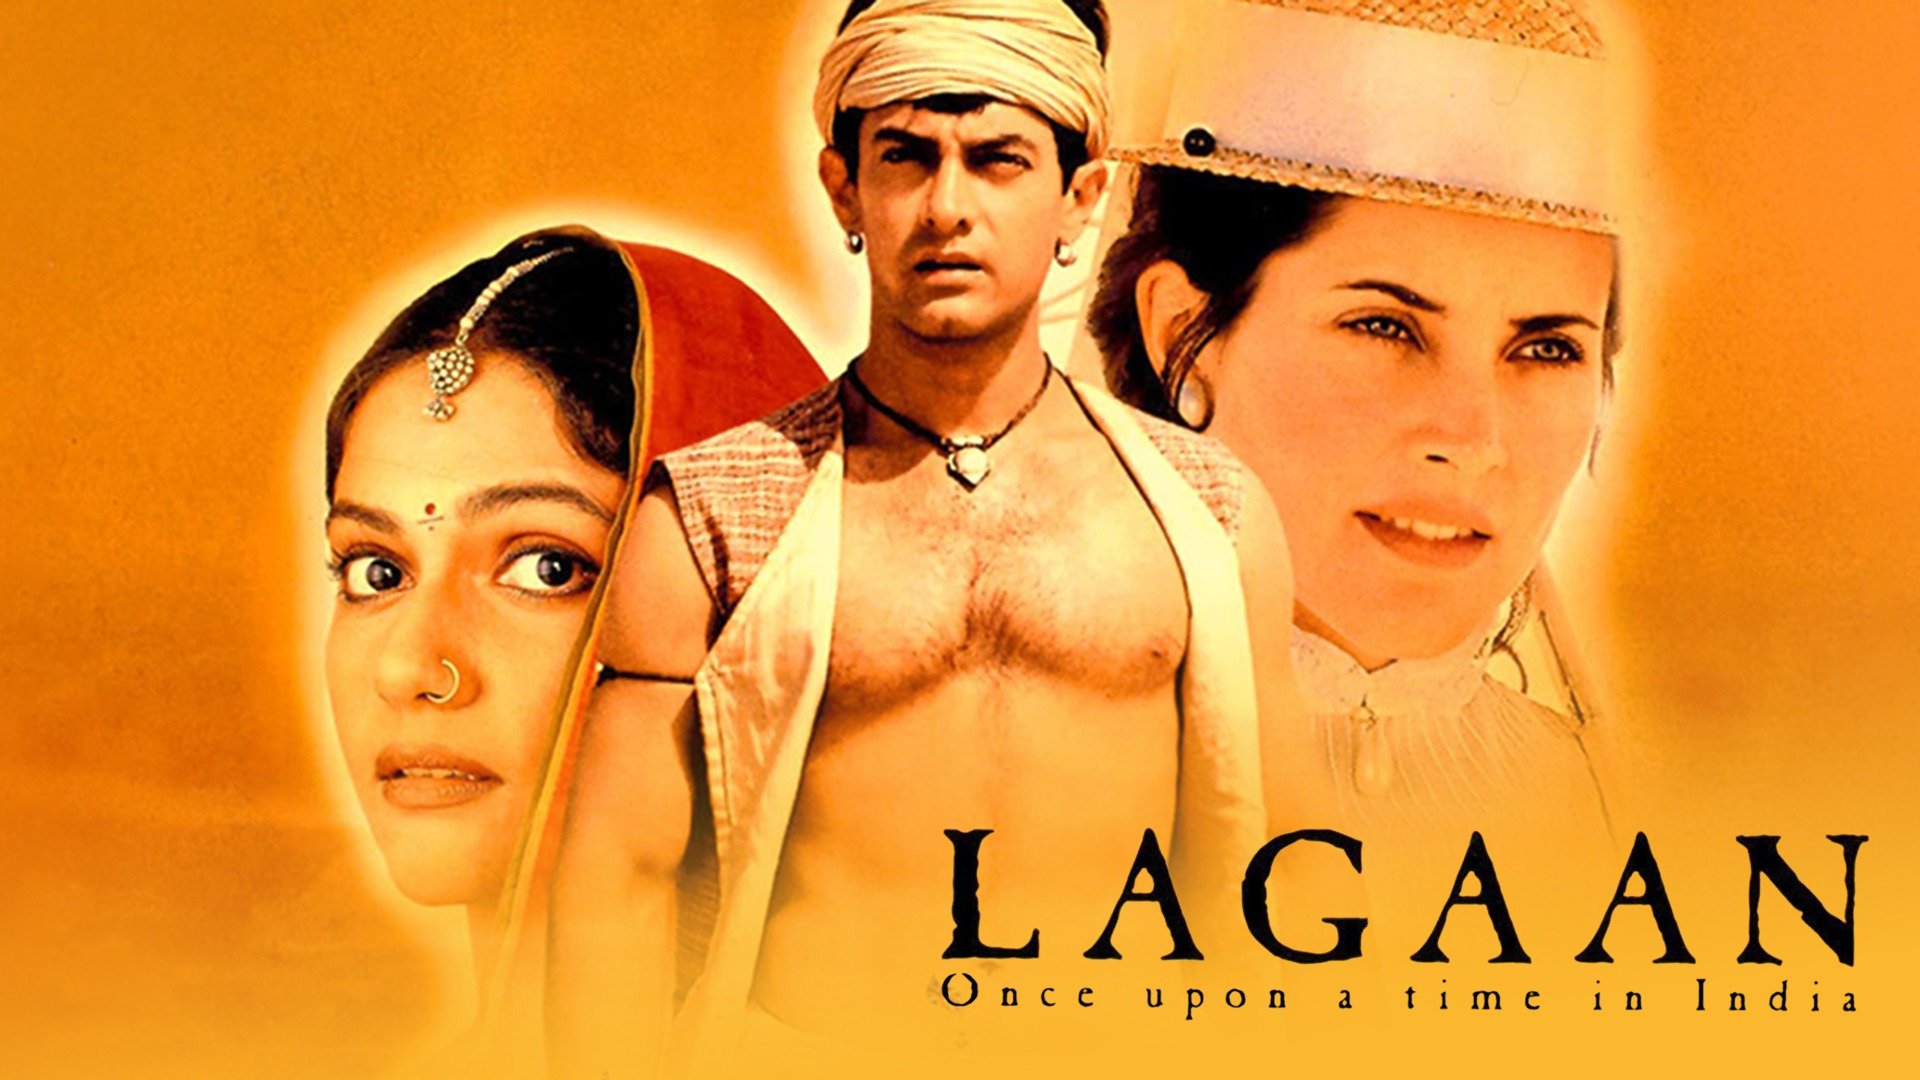 alex silveyra recommends watch lagaan online free pic